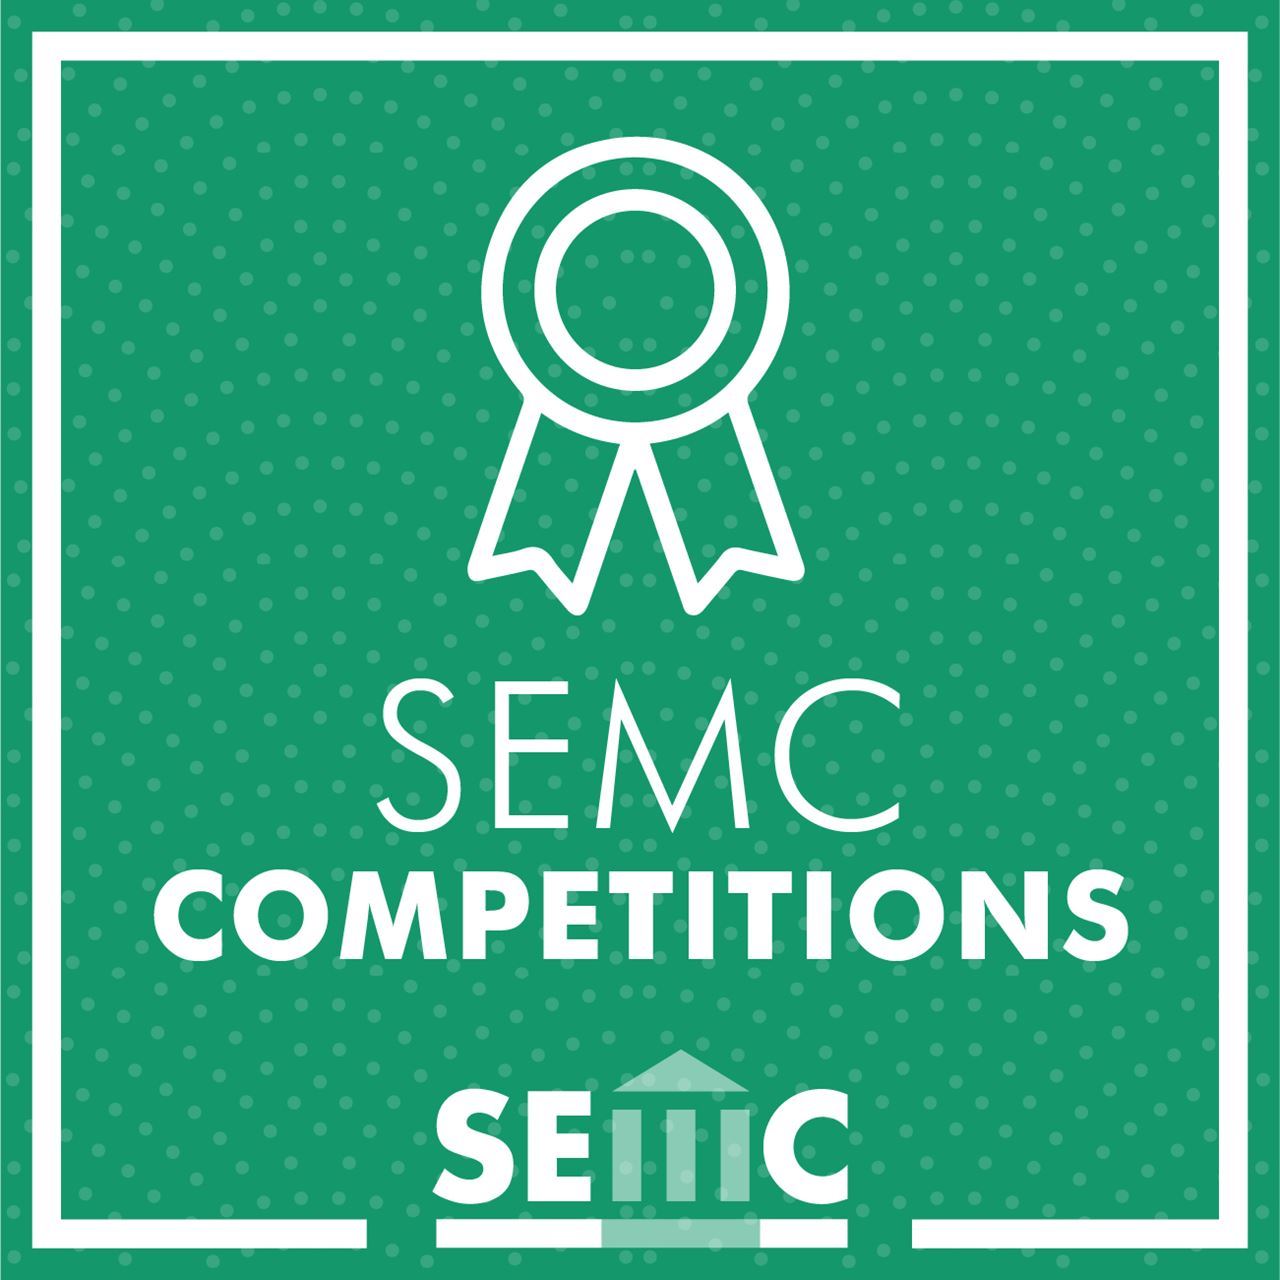 Dark green polka-dotted background with a graphic of a medal and the words “SEMC Competitions” centered. The SEMC logo is also at the bottom. 